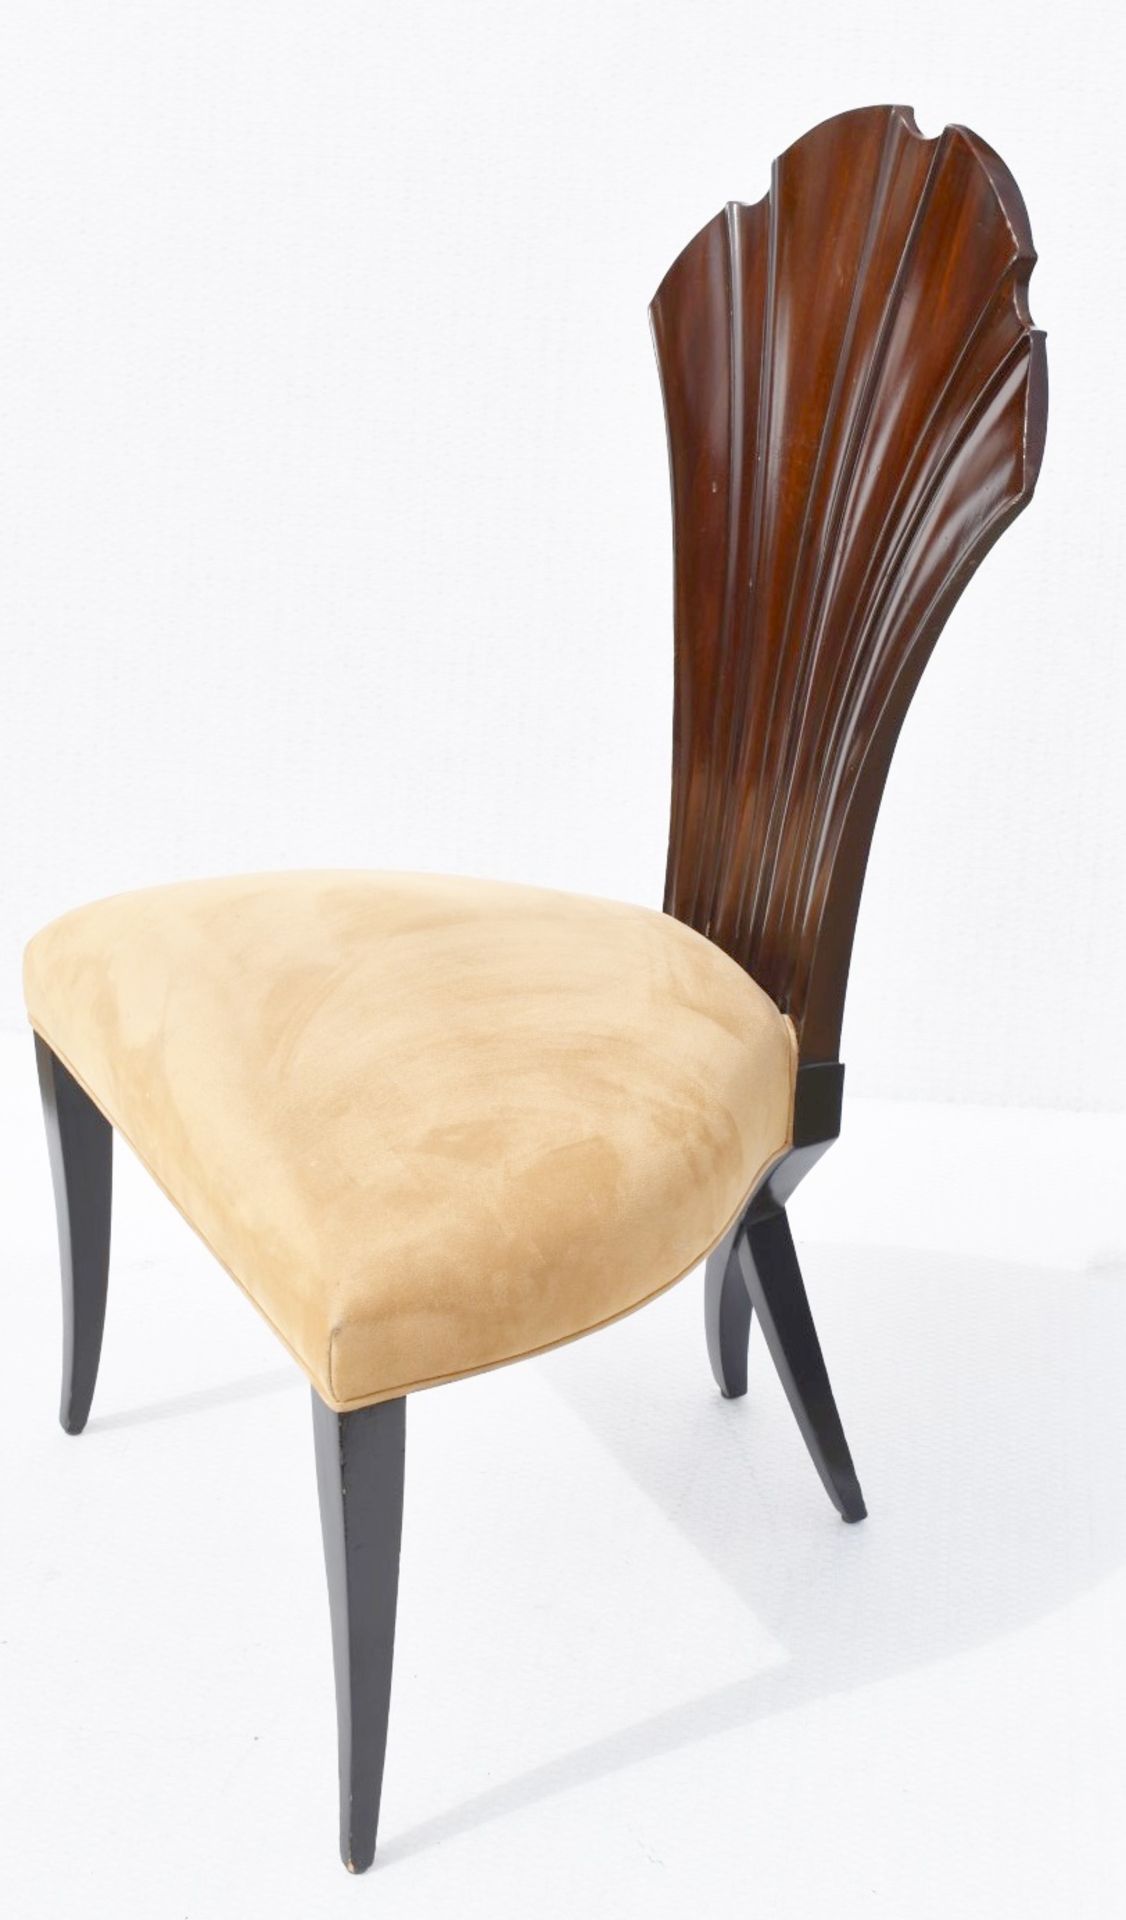 4 x CHRISTOPHER GUY 'La Croisette' Luxury Hand-carved Solid Mahogany Designer Dining Chairs - - Bild 2 aus 11